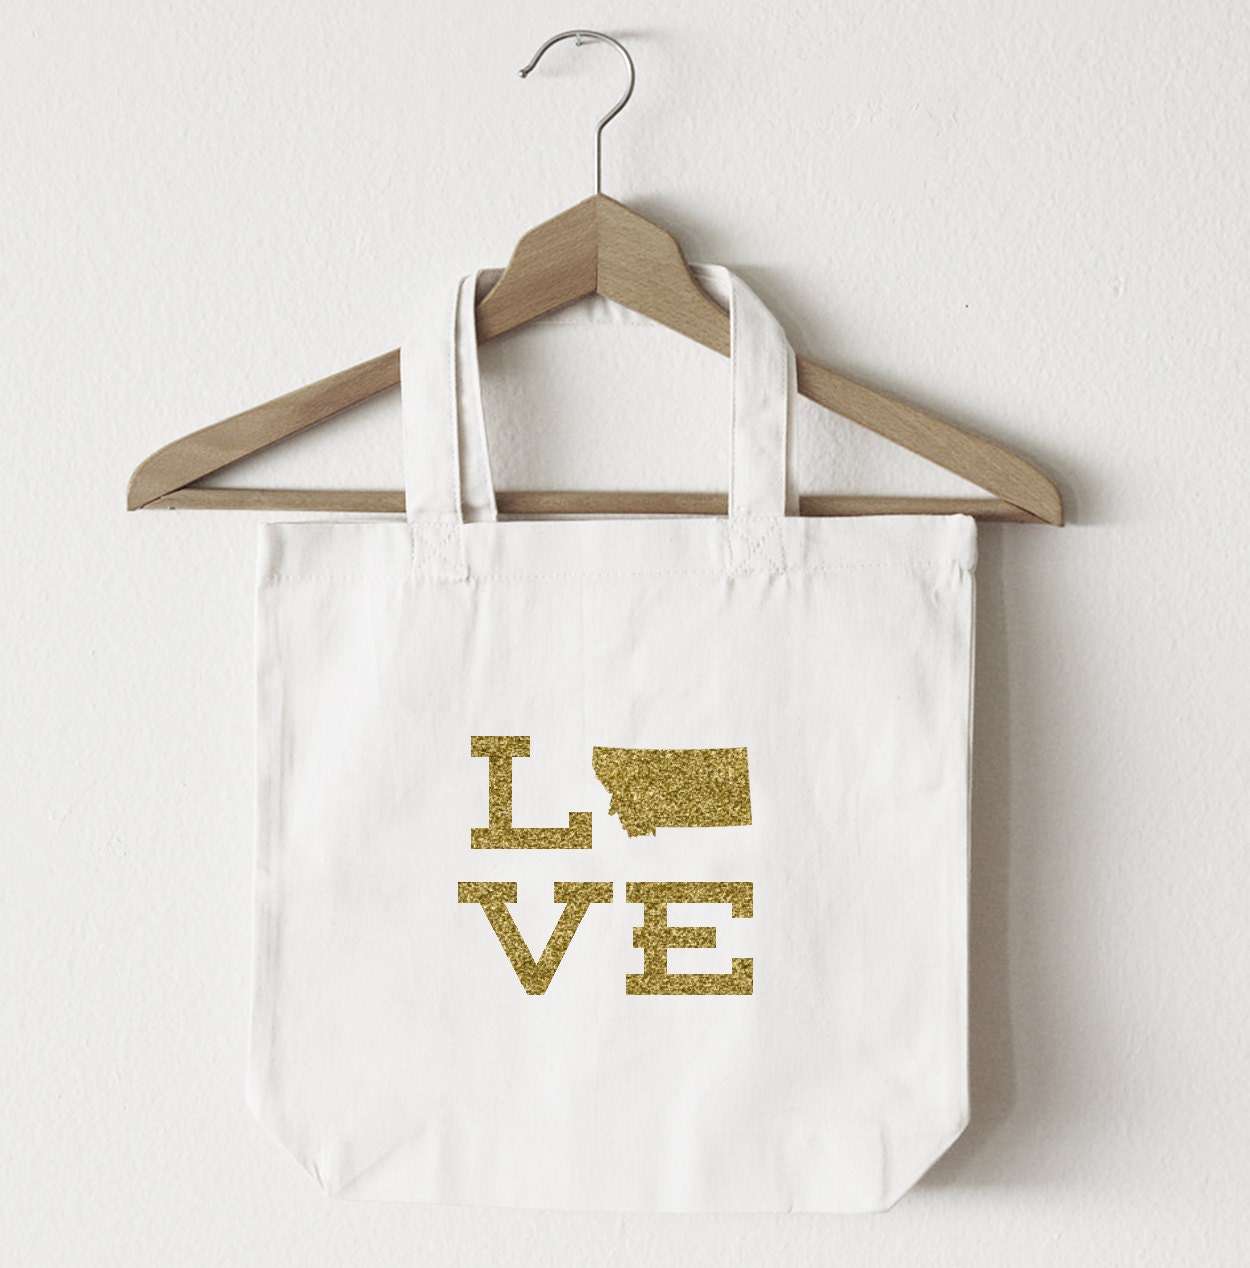 Personalized tote bag canvas, Valexico